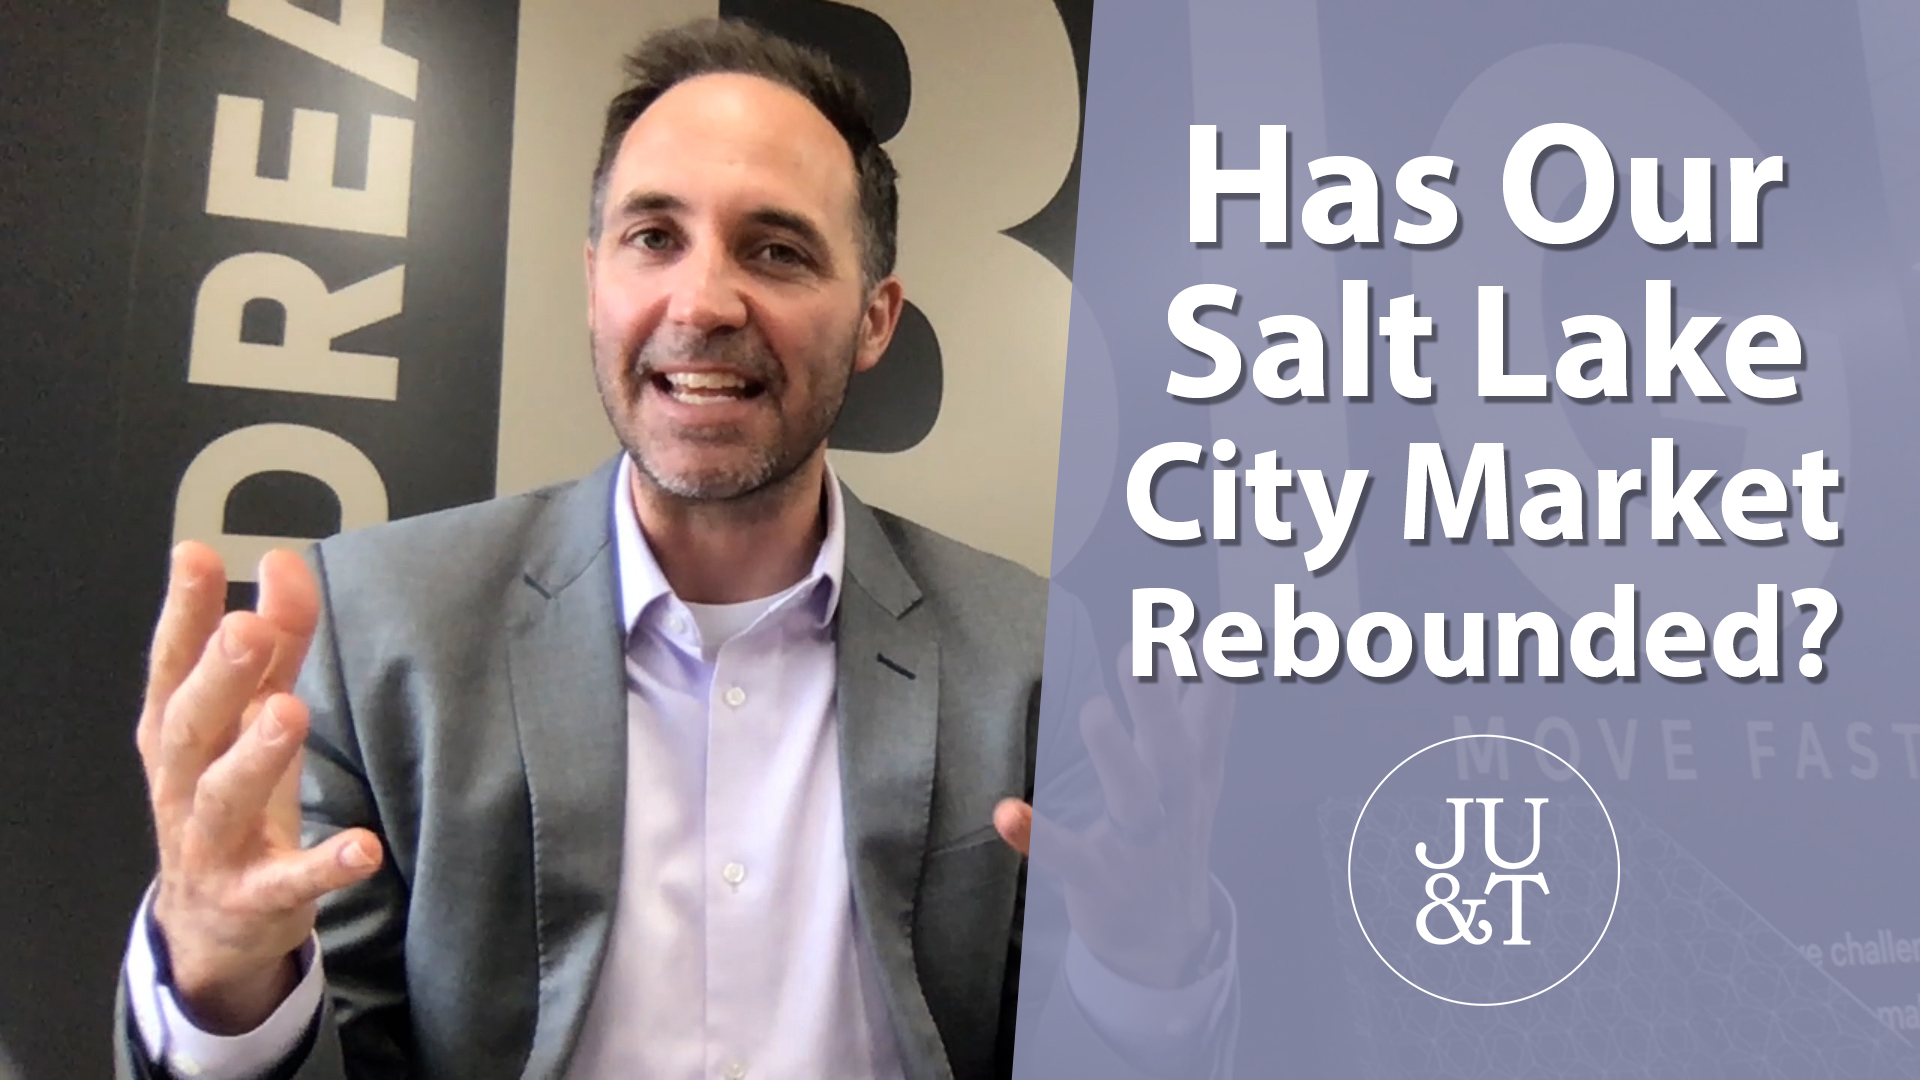 Your May Salt Lake City Market Update